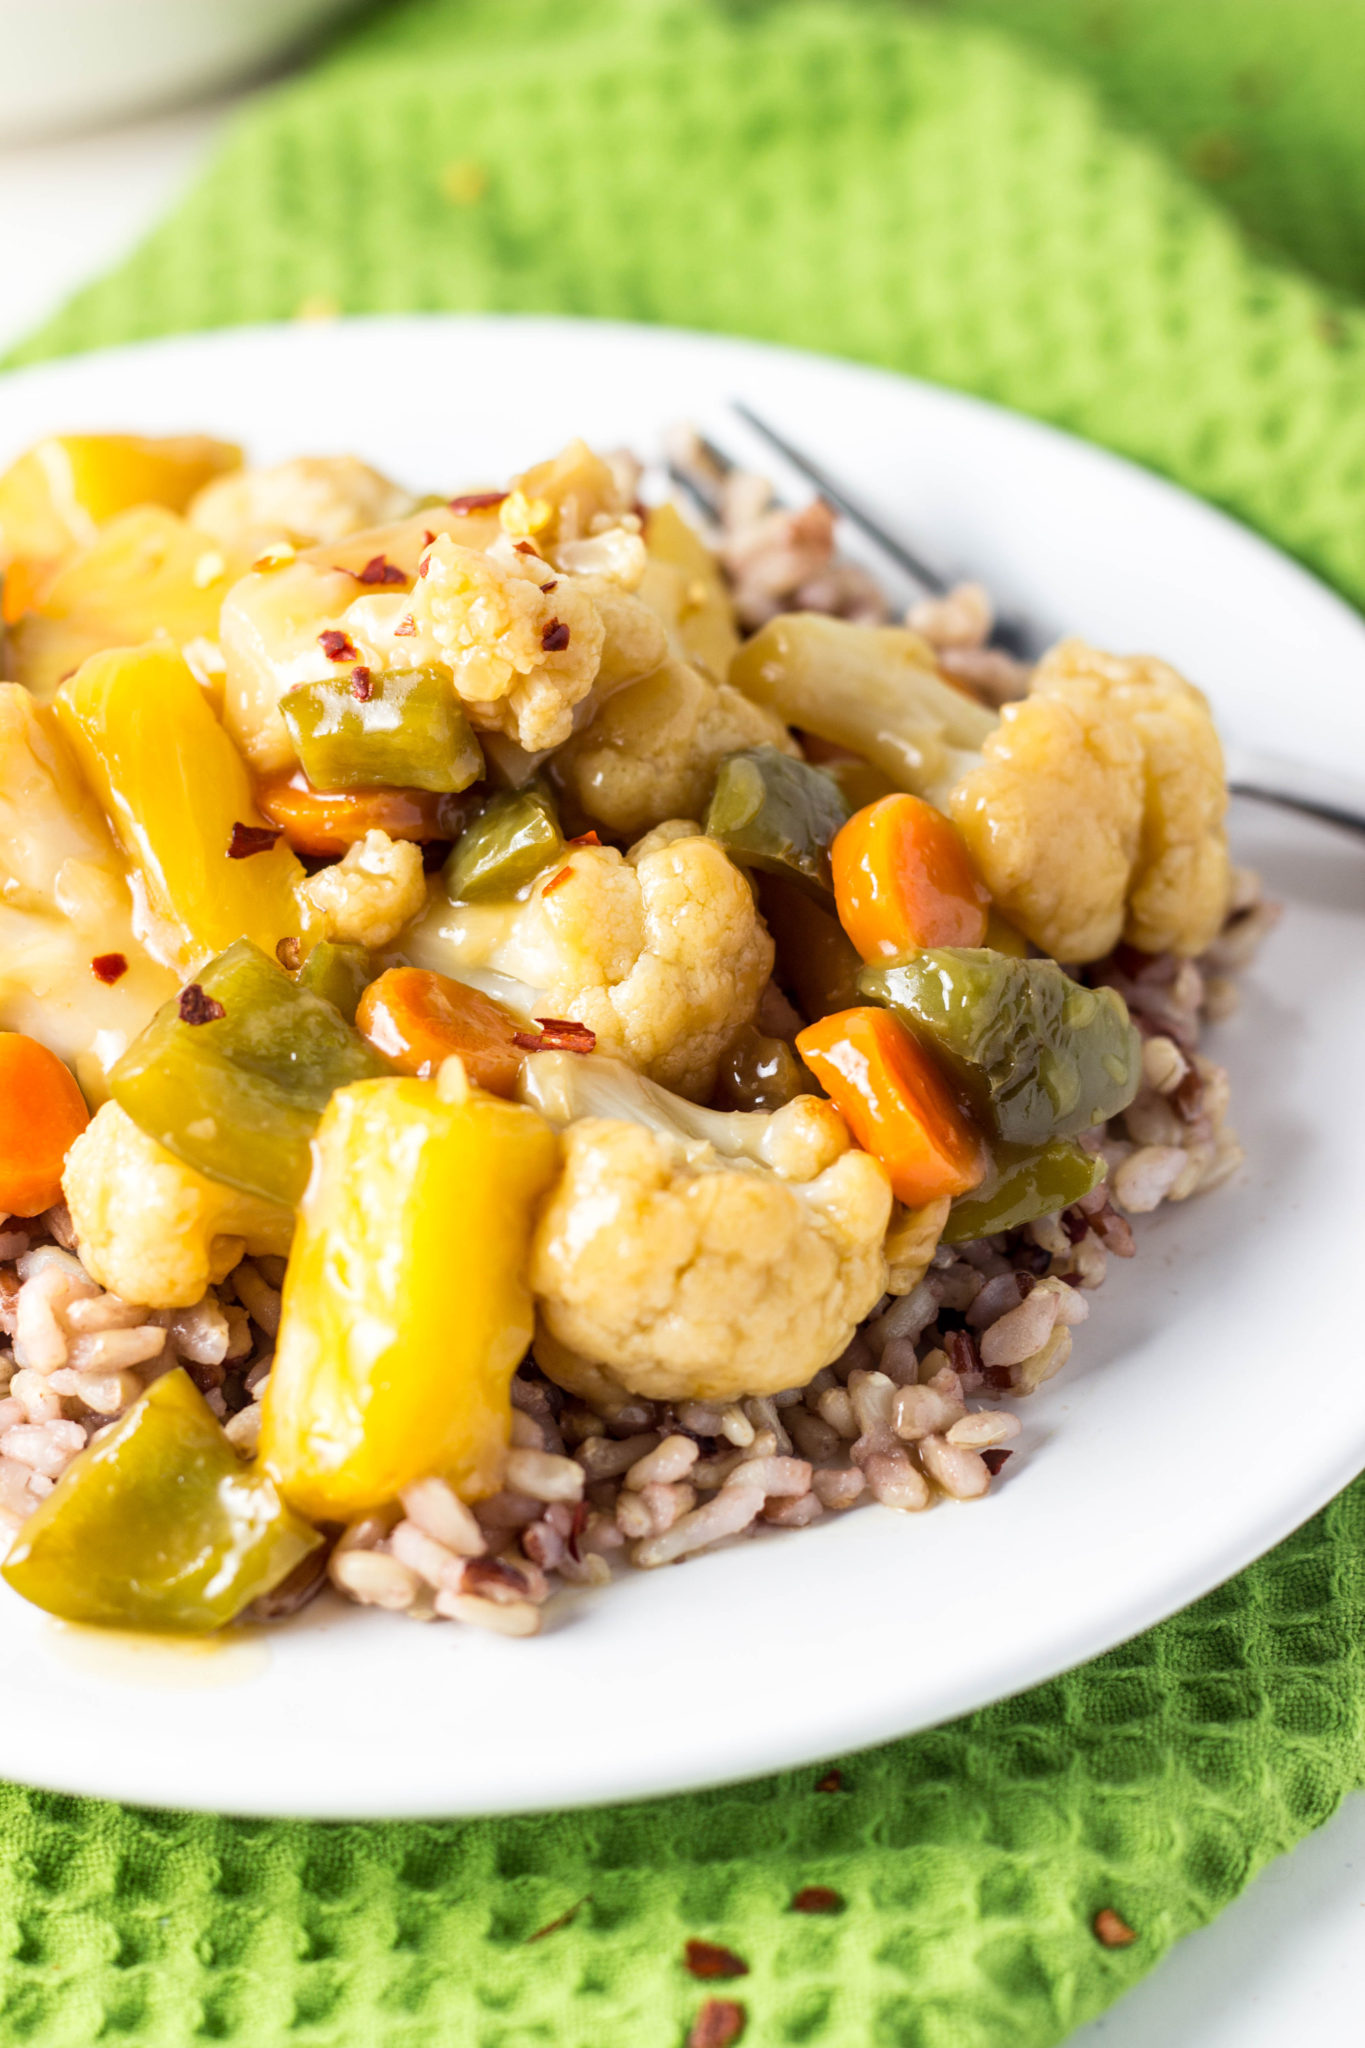 Vegan Sweet and Sour Veggies-These Vegan Sweet and Sour Veggies have all the delicious flavor of the popular take out dish, but without the refined sugar. Made with coconut sugar & GF.